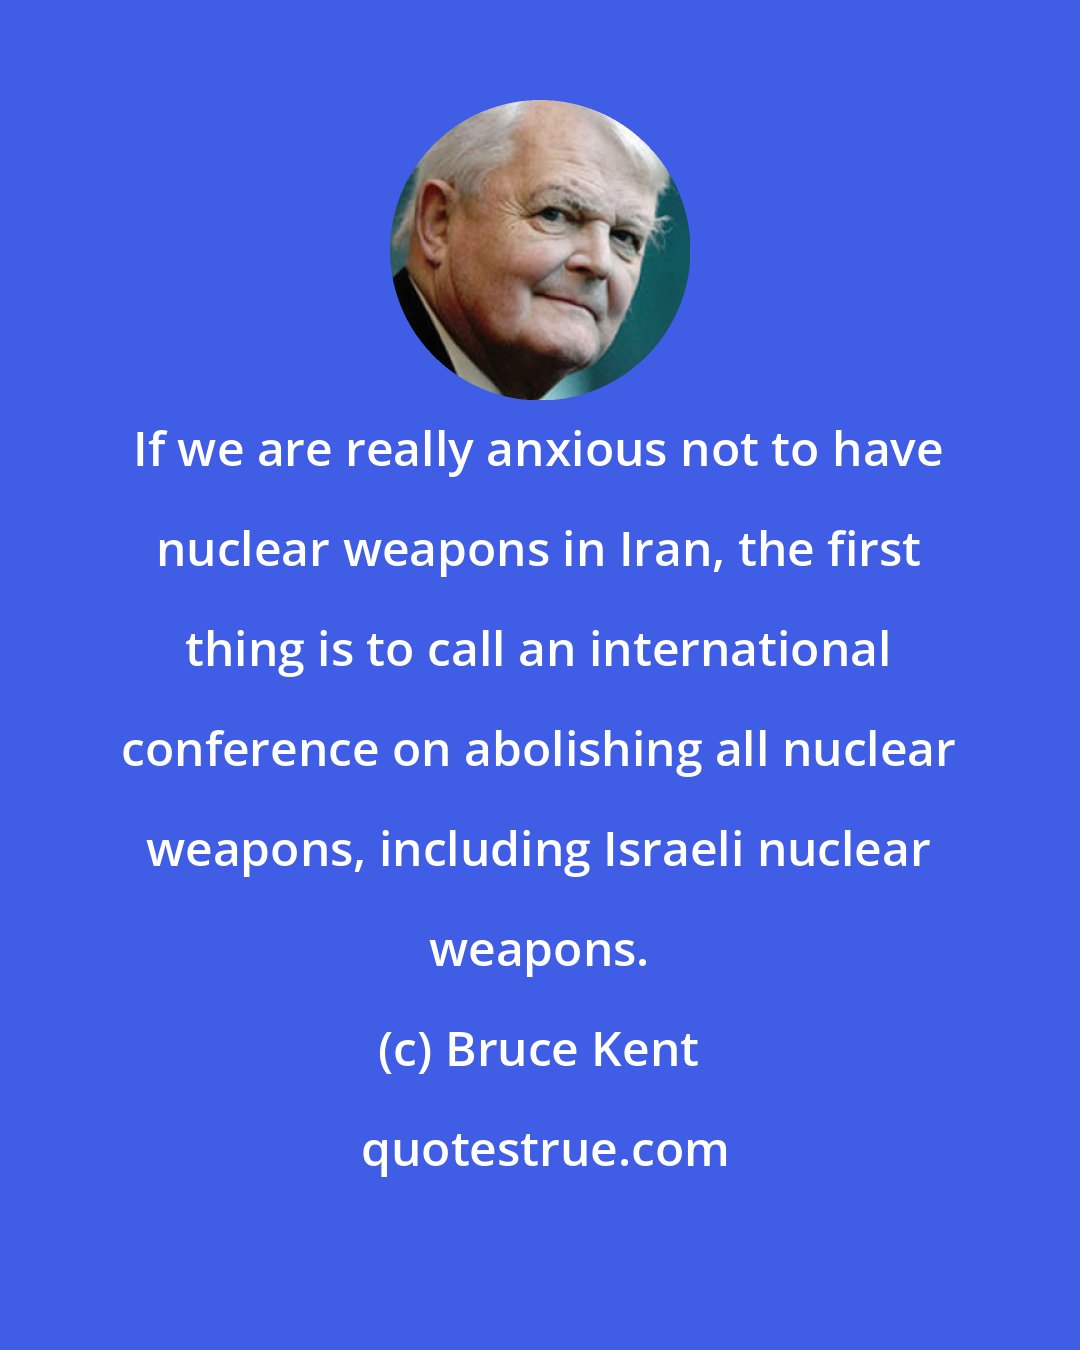 Bruce Kent: If we are really anxious not to have nuclear weapons in Iran, the first thing is to call an international conference on abolishing all nuclear weapons, including Israeli nuclear weapons.